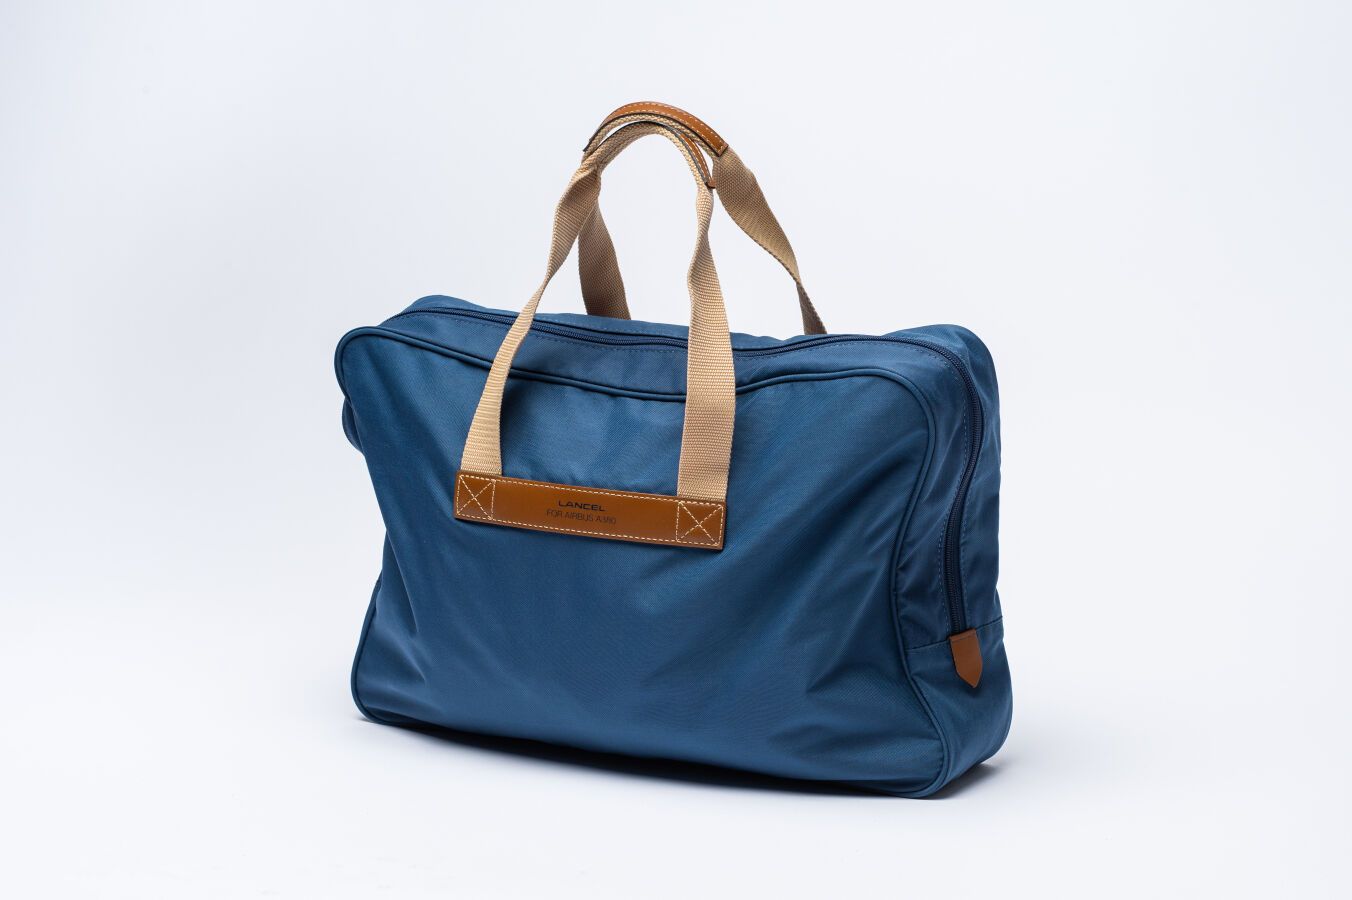 Null A380. Lancel bag. Travel bag created by the leather goods manufacturer Lanc&hellip;